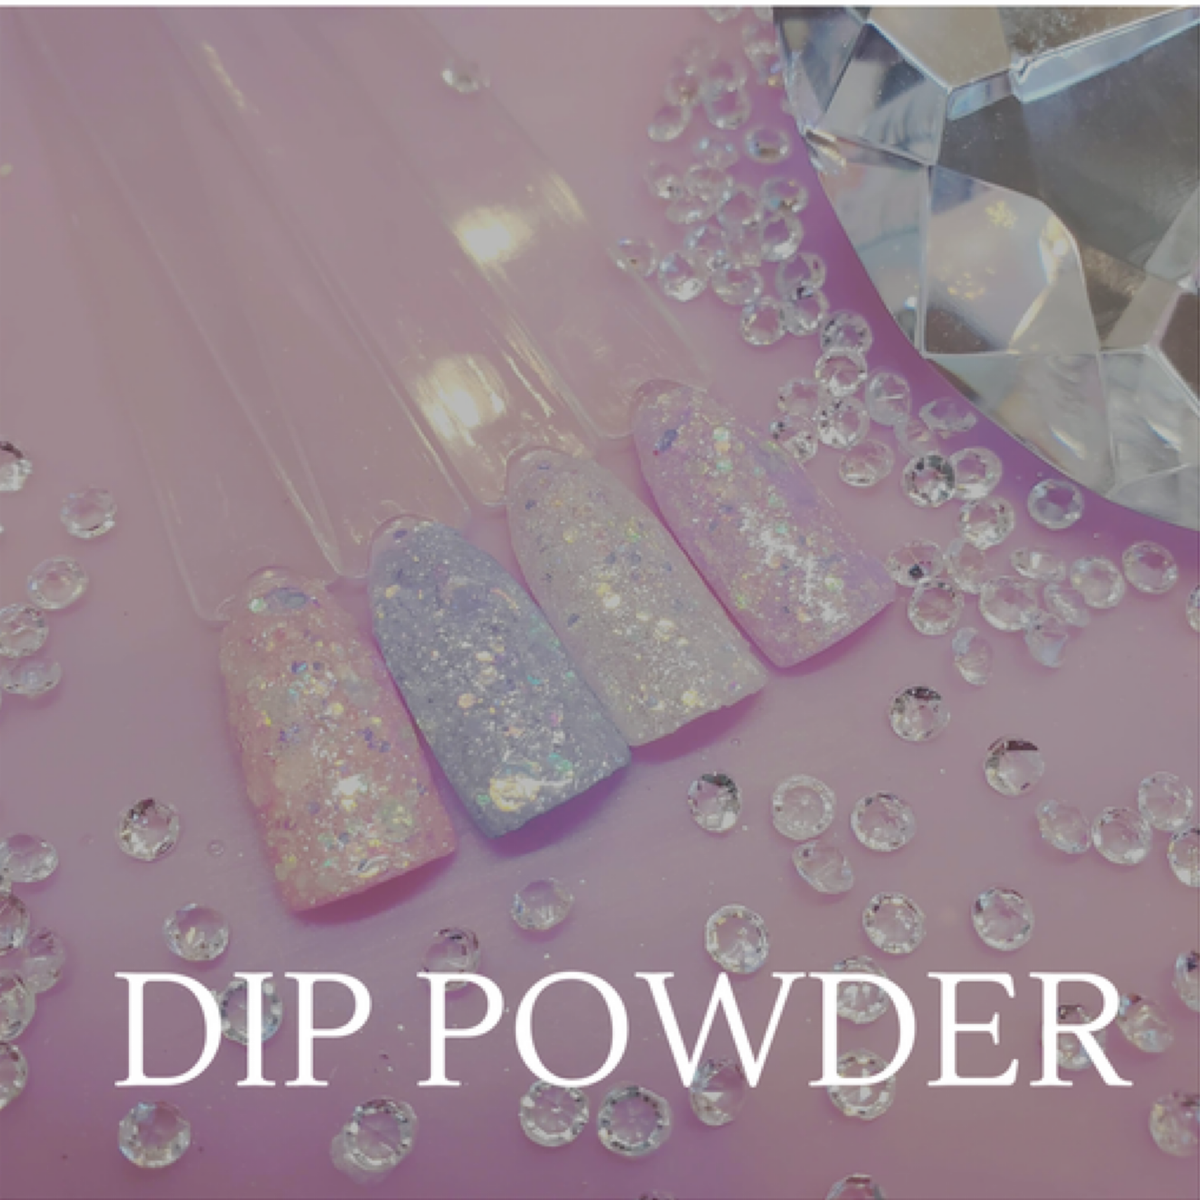 Silicone Nail Mat – TRIPLE D DODI'S DIPS AND DECALS